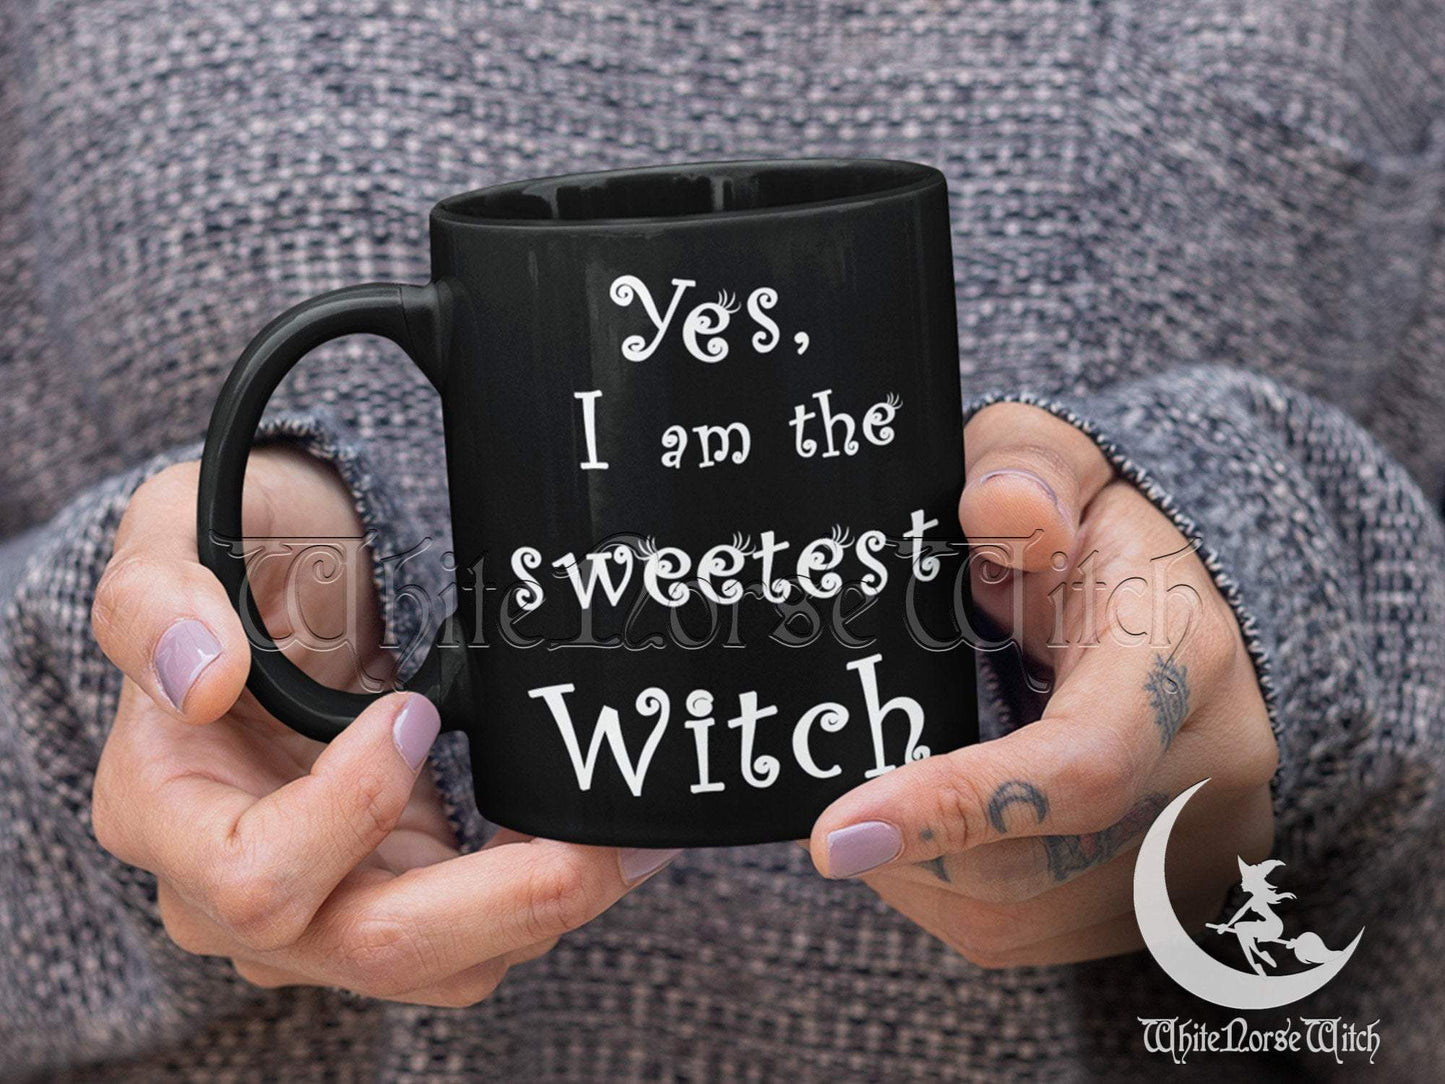 Witch Coffee Mug - The Sweetest Witch, Witchy Gift for Her, Black 11oz TheNorseWind